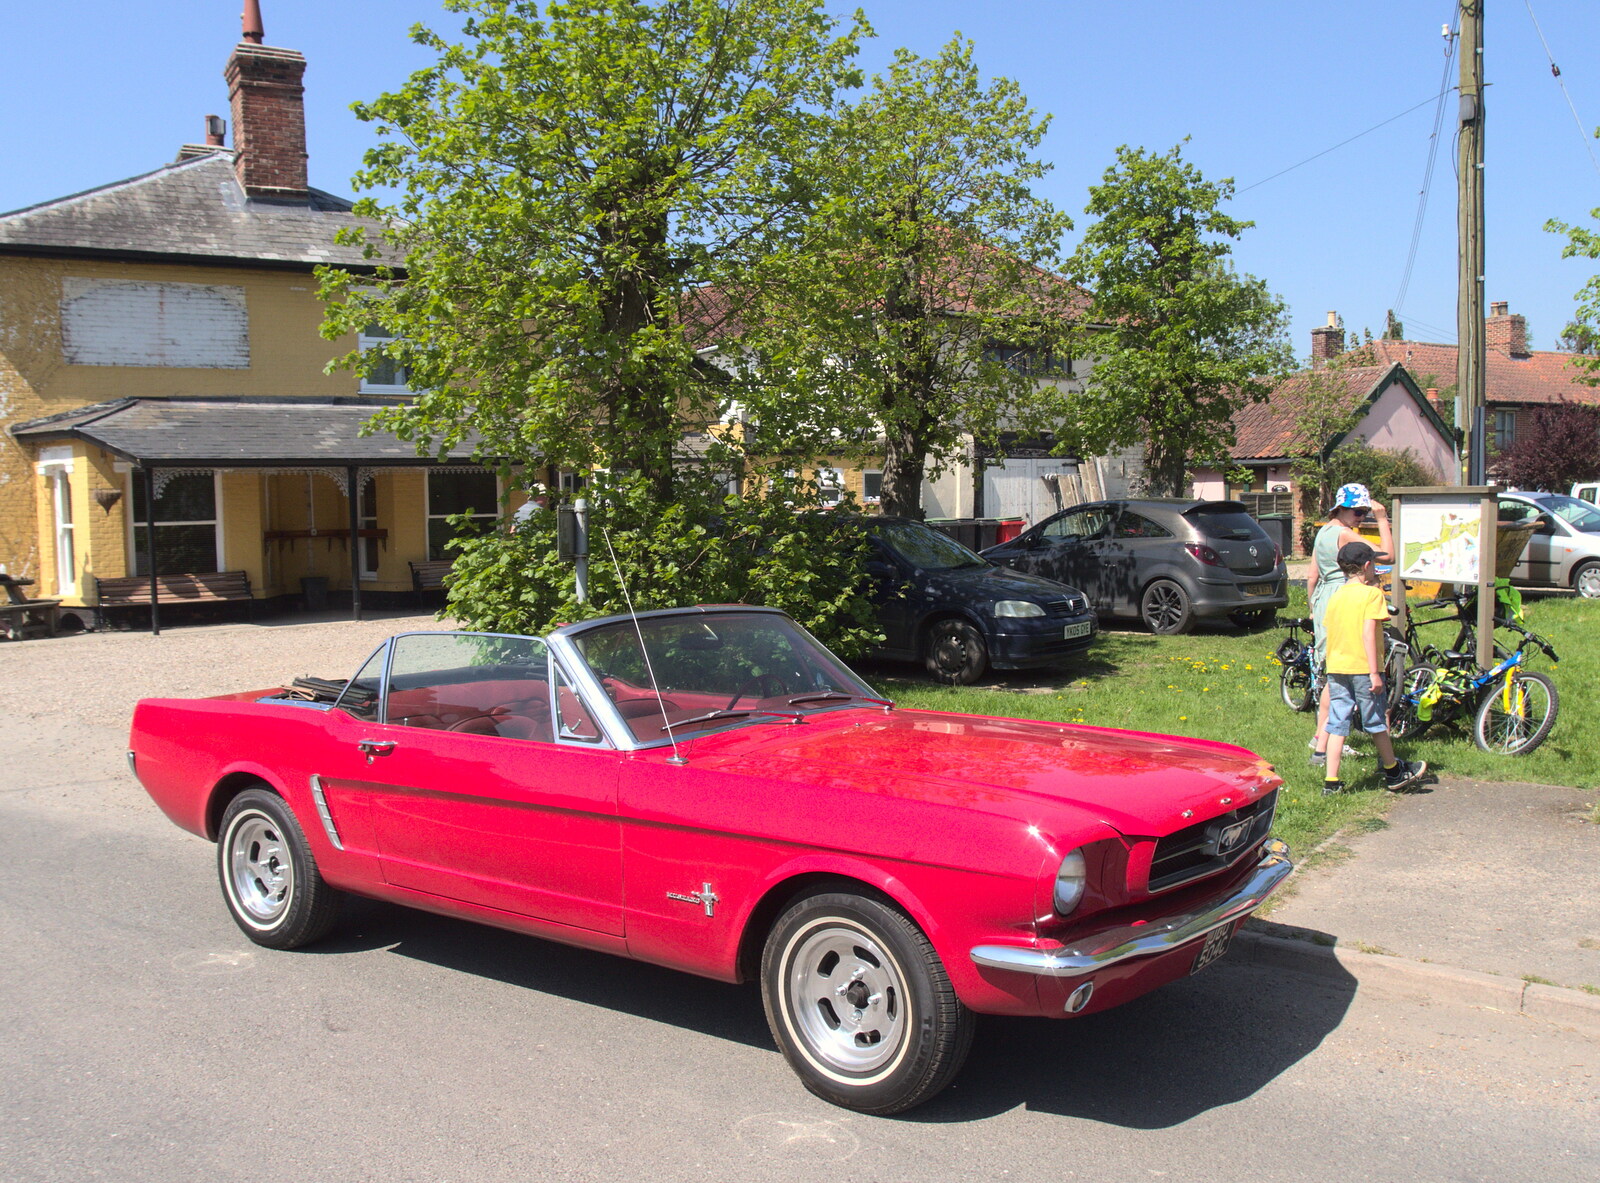 A vintage Ford Mustang by the Mellis Railway from A Bike Ride to the Railway Tavern, Mellis, Suffolk - 7th May 2018